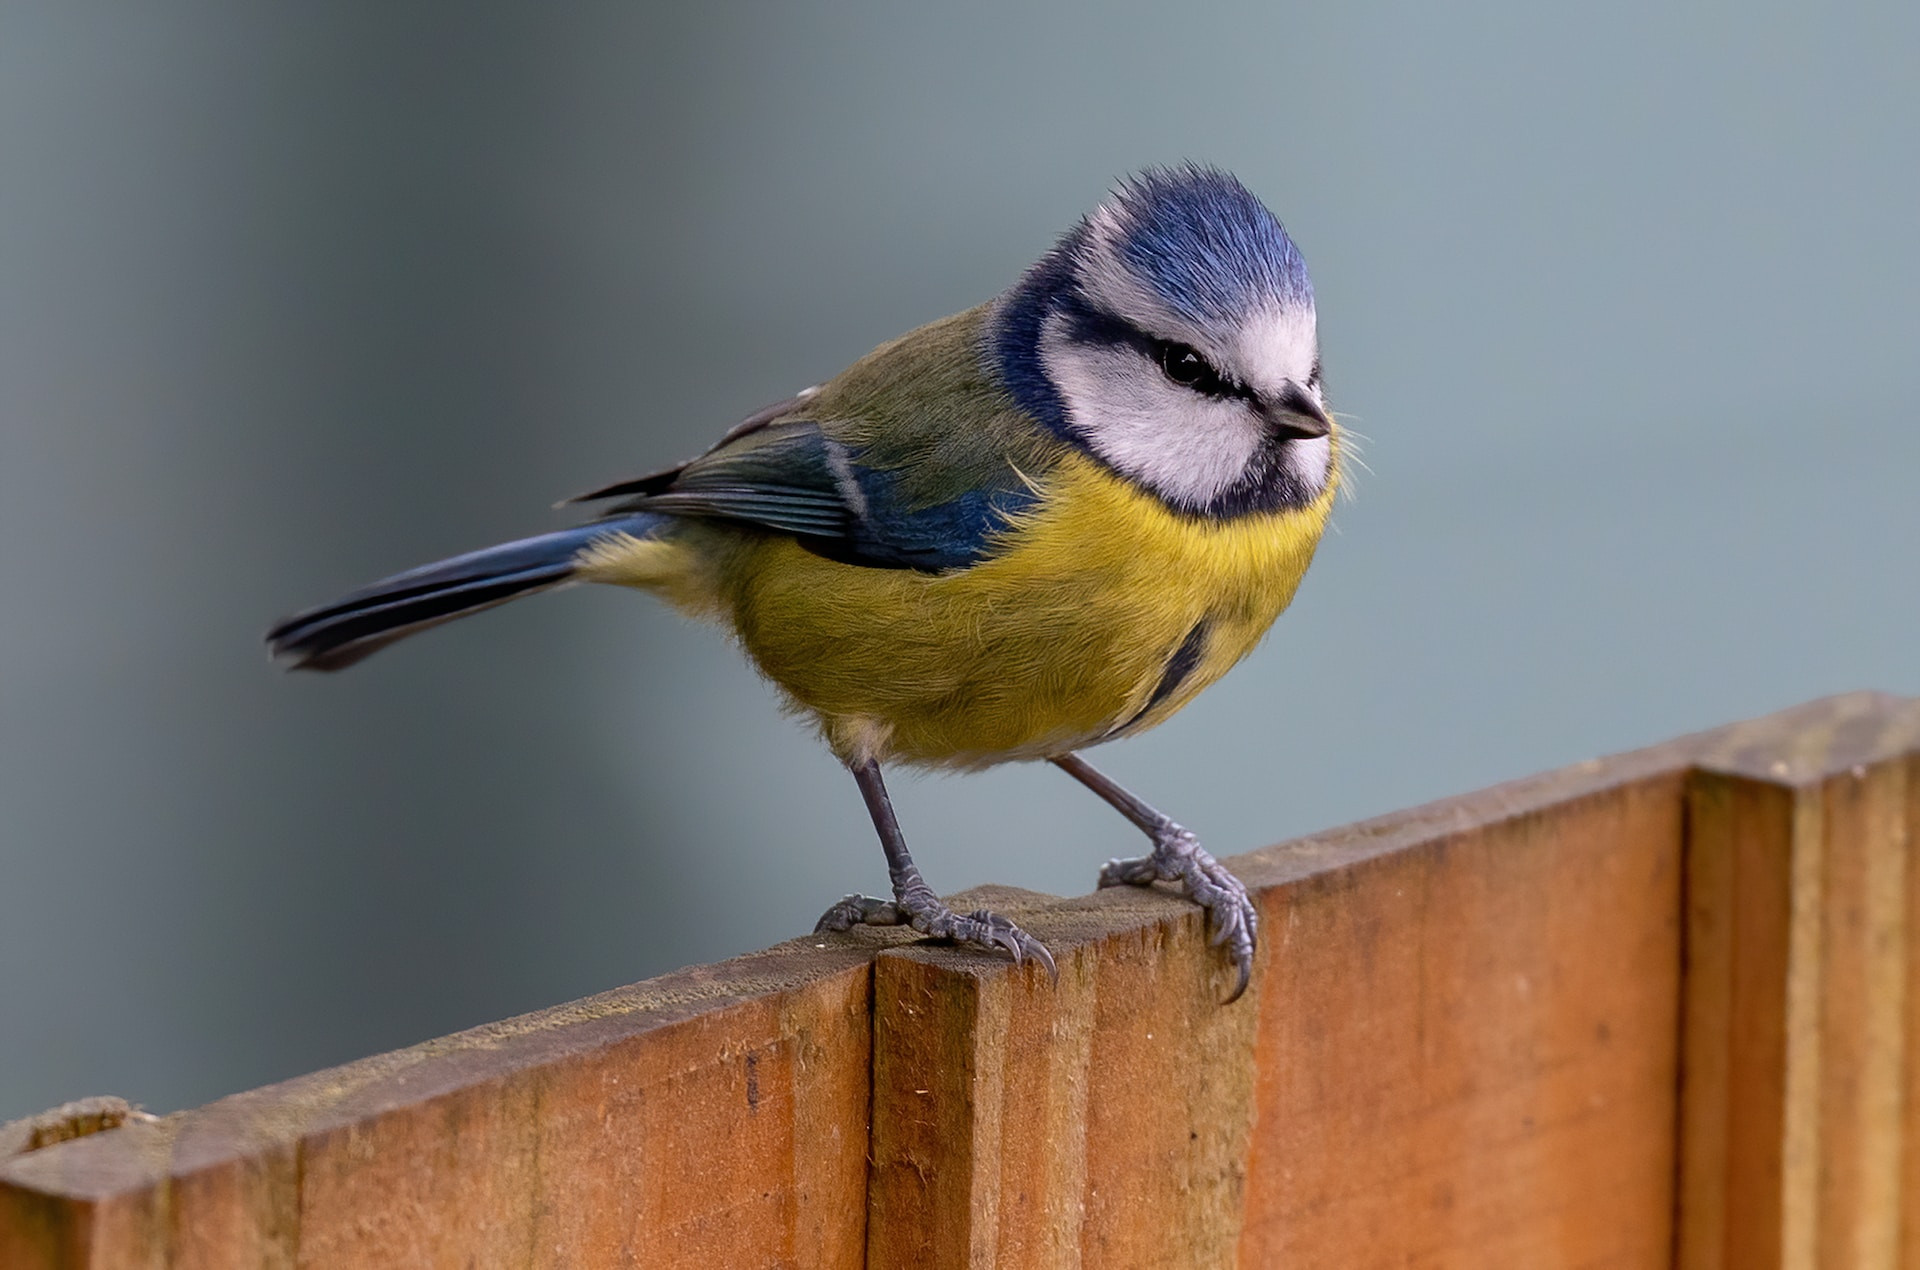 Blue tit perched on fence, photo by Bob Brewer courtesy of Unsplash